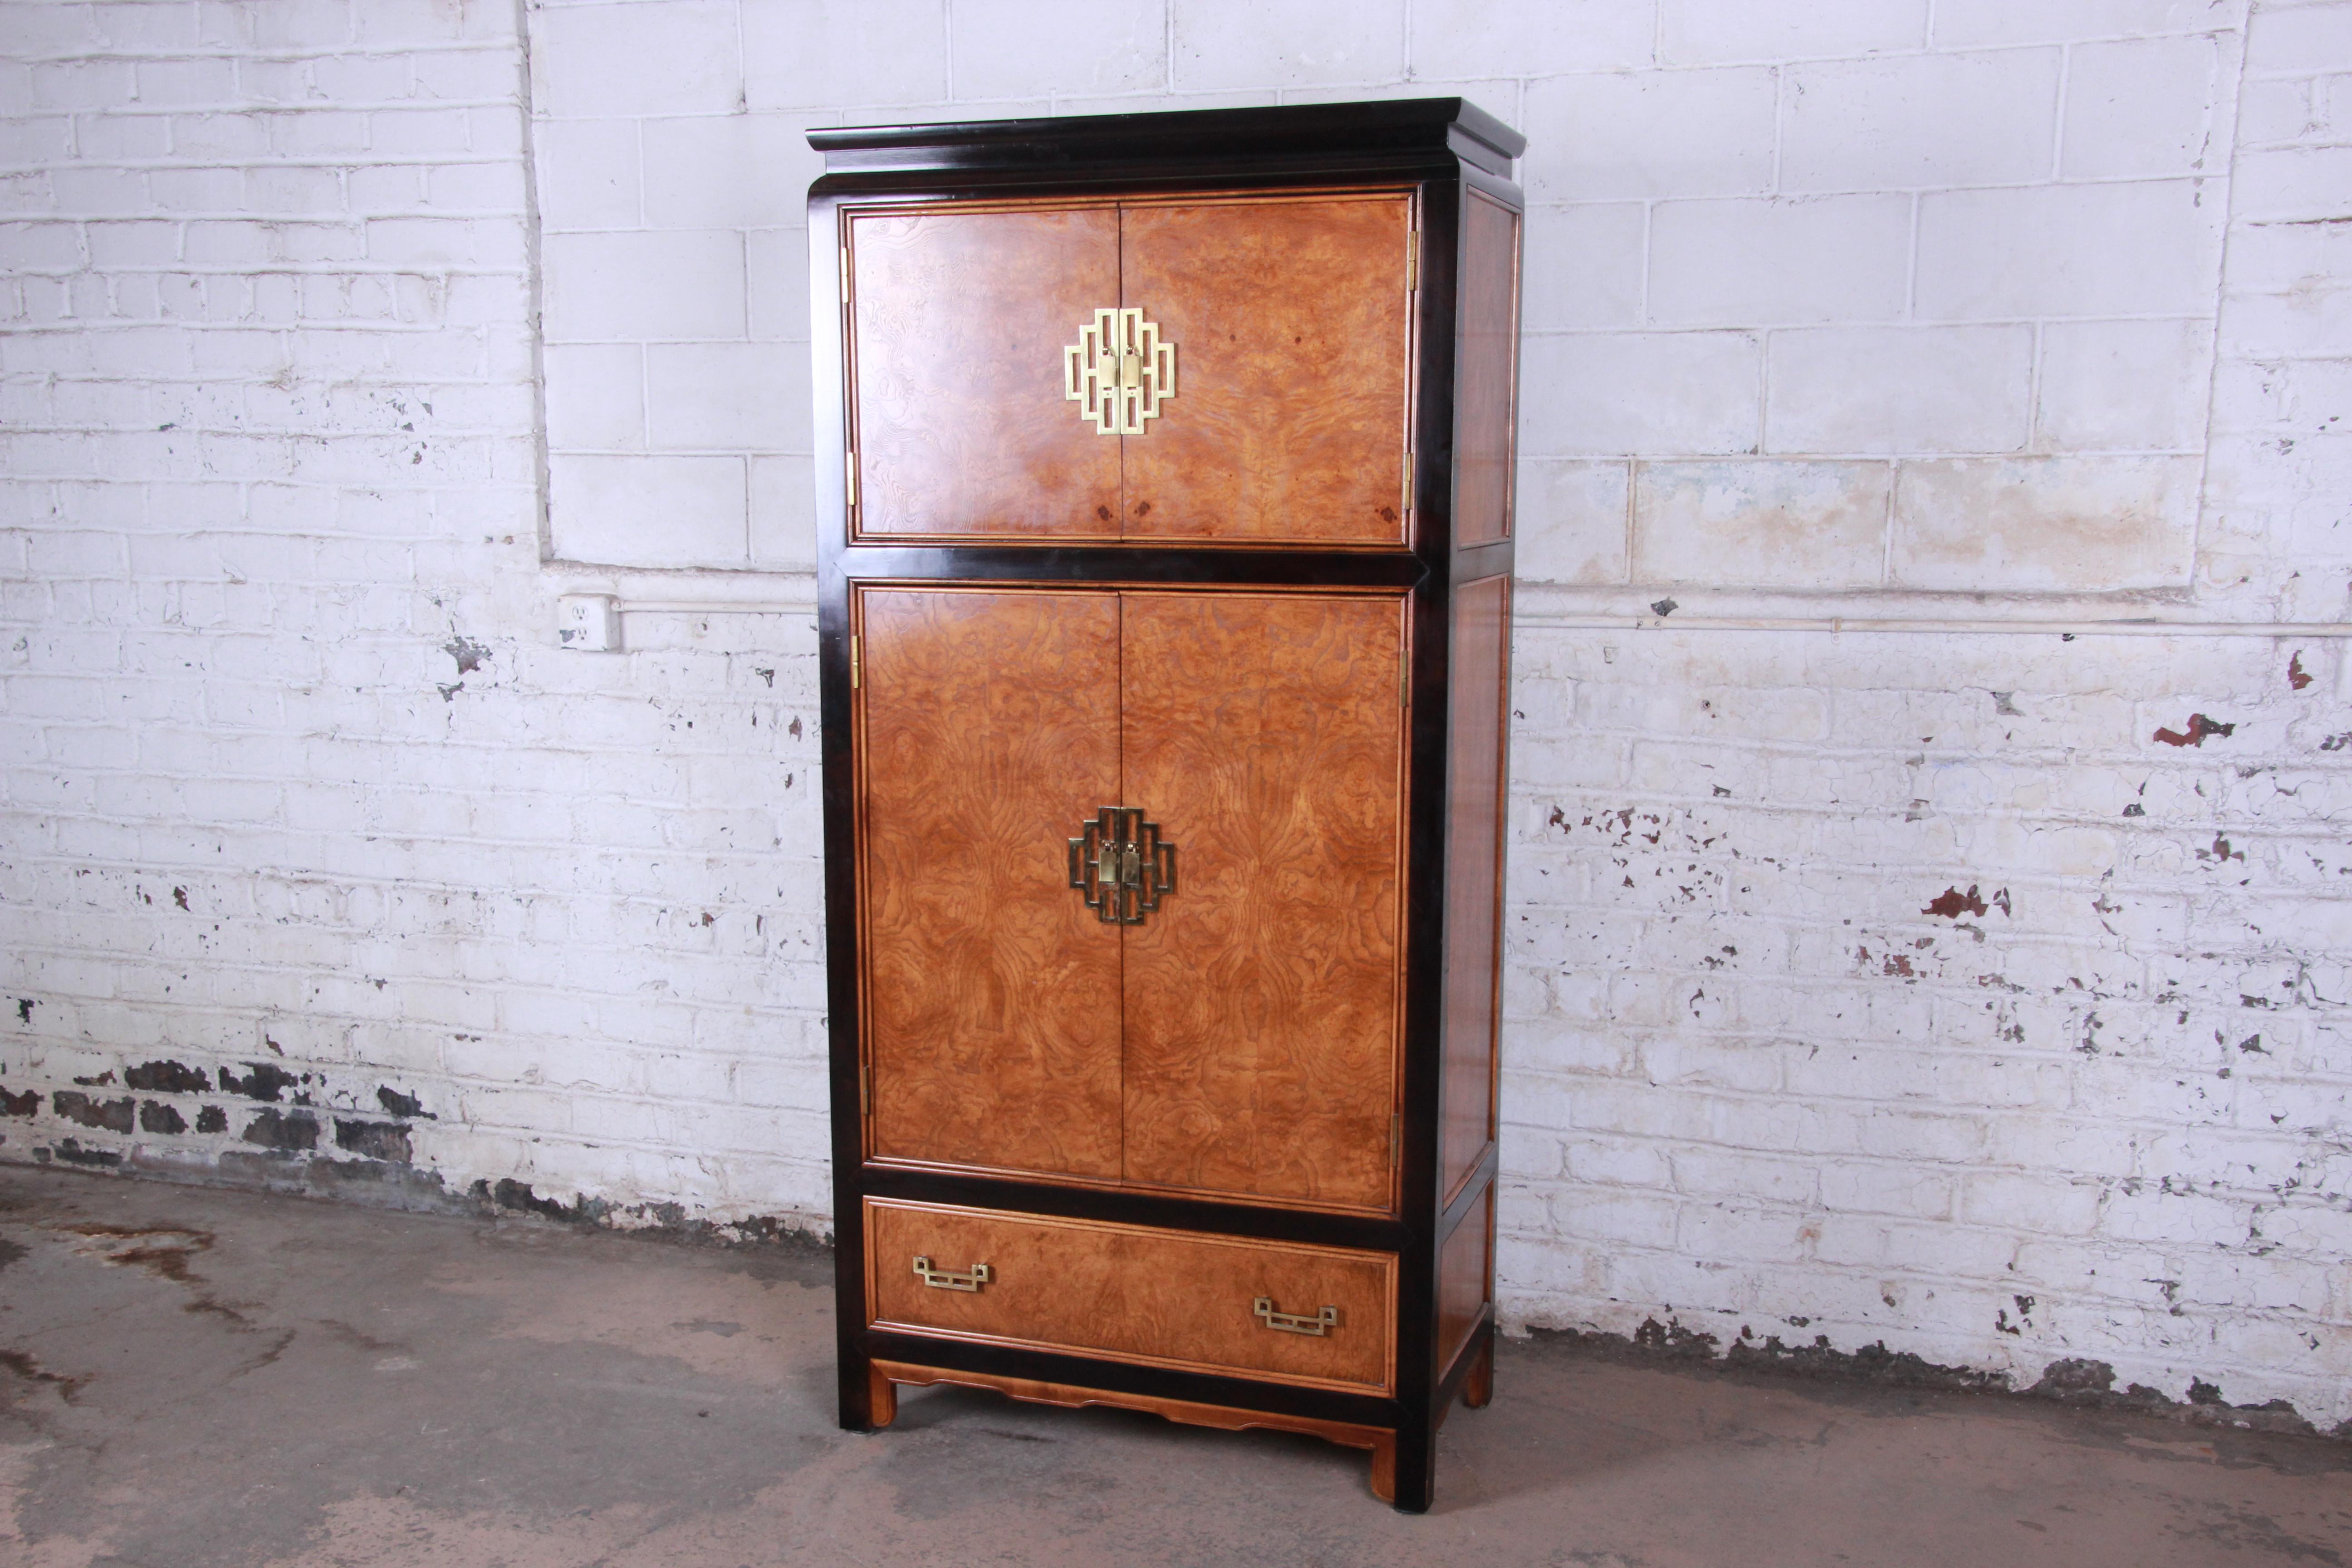 Offering a very nice Century Furniture black lacquered and burl wood chinoiserie armoire. The dresser has beautiful burl wood encased in a black lacquered finish. The top of the armoire has two cabinet doors that open to a shelf for storage. The